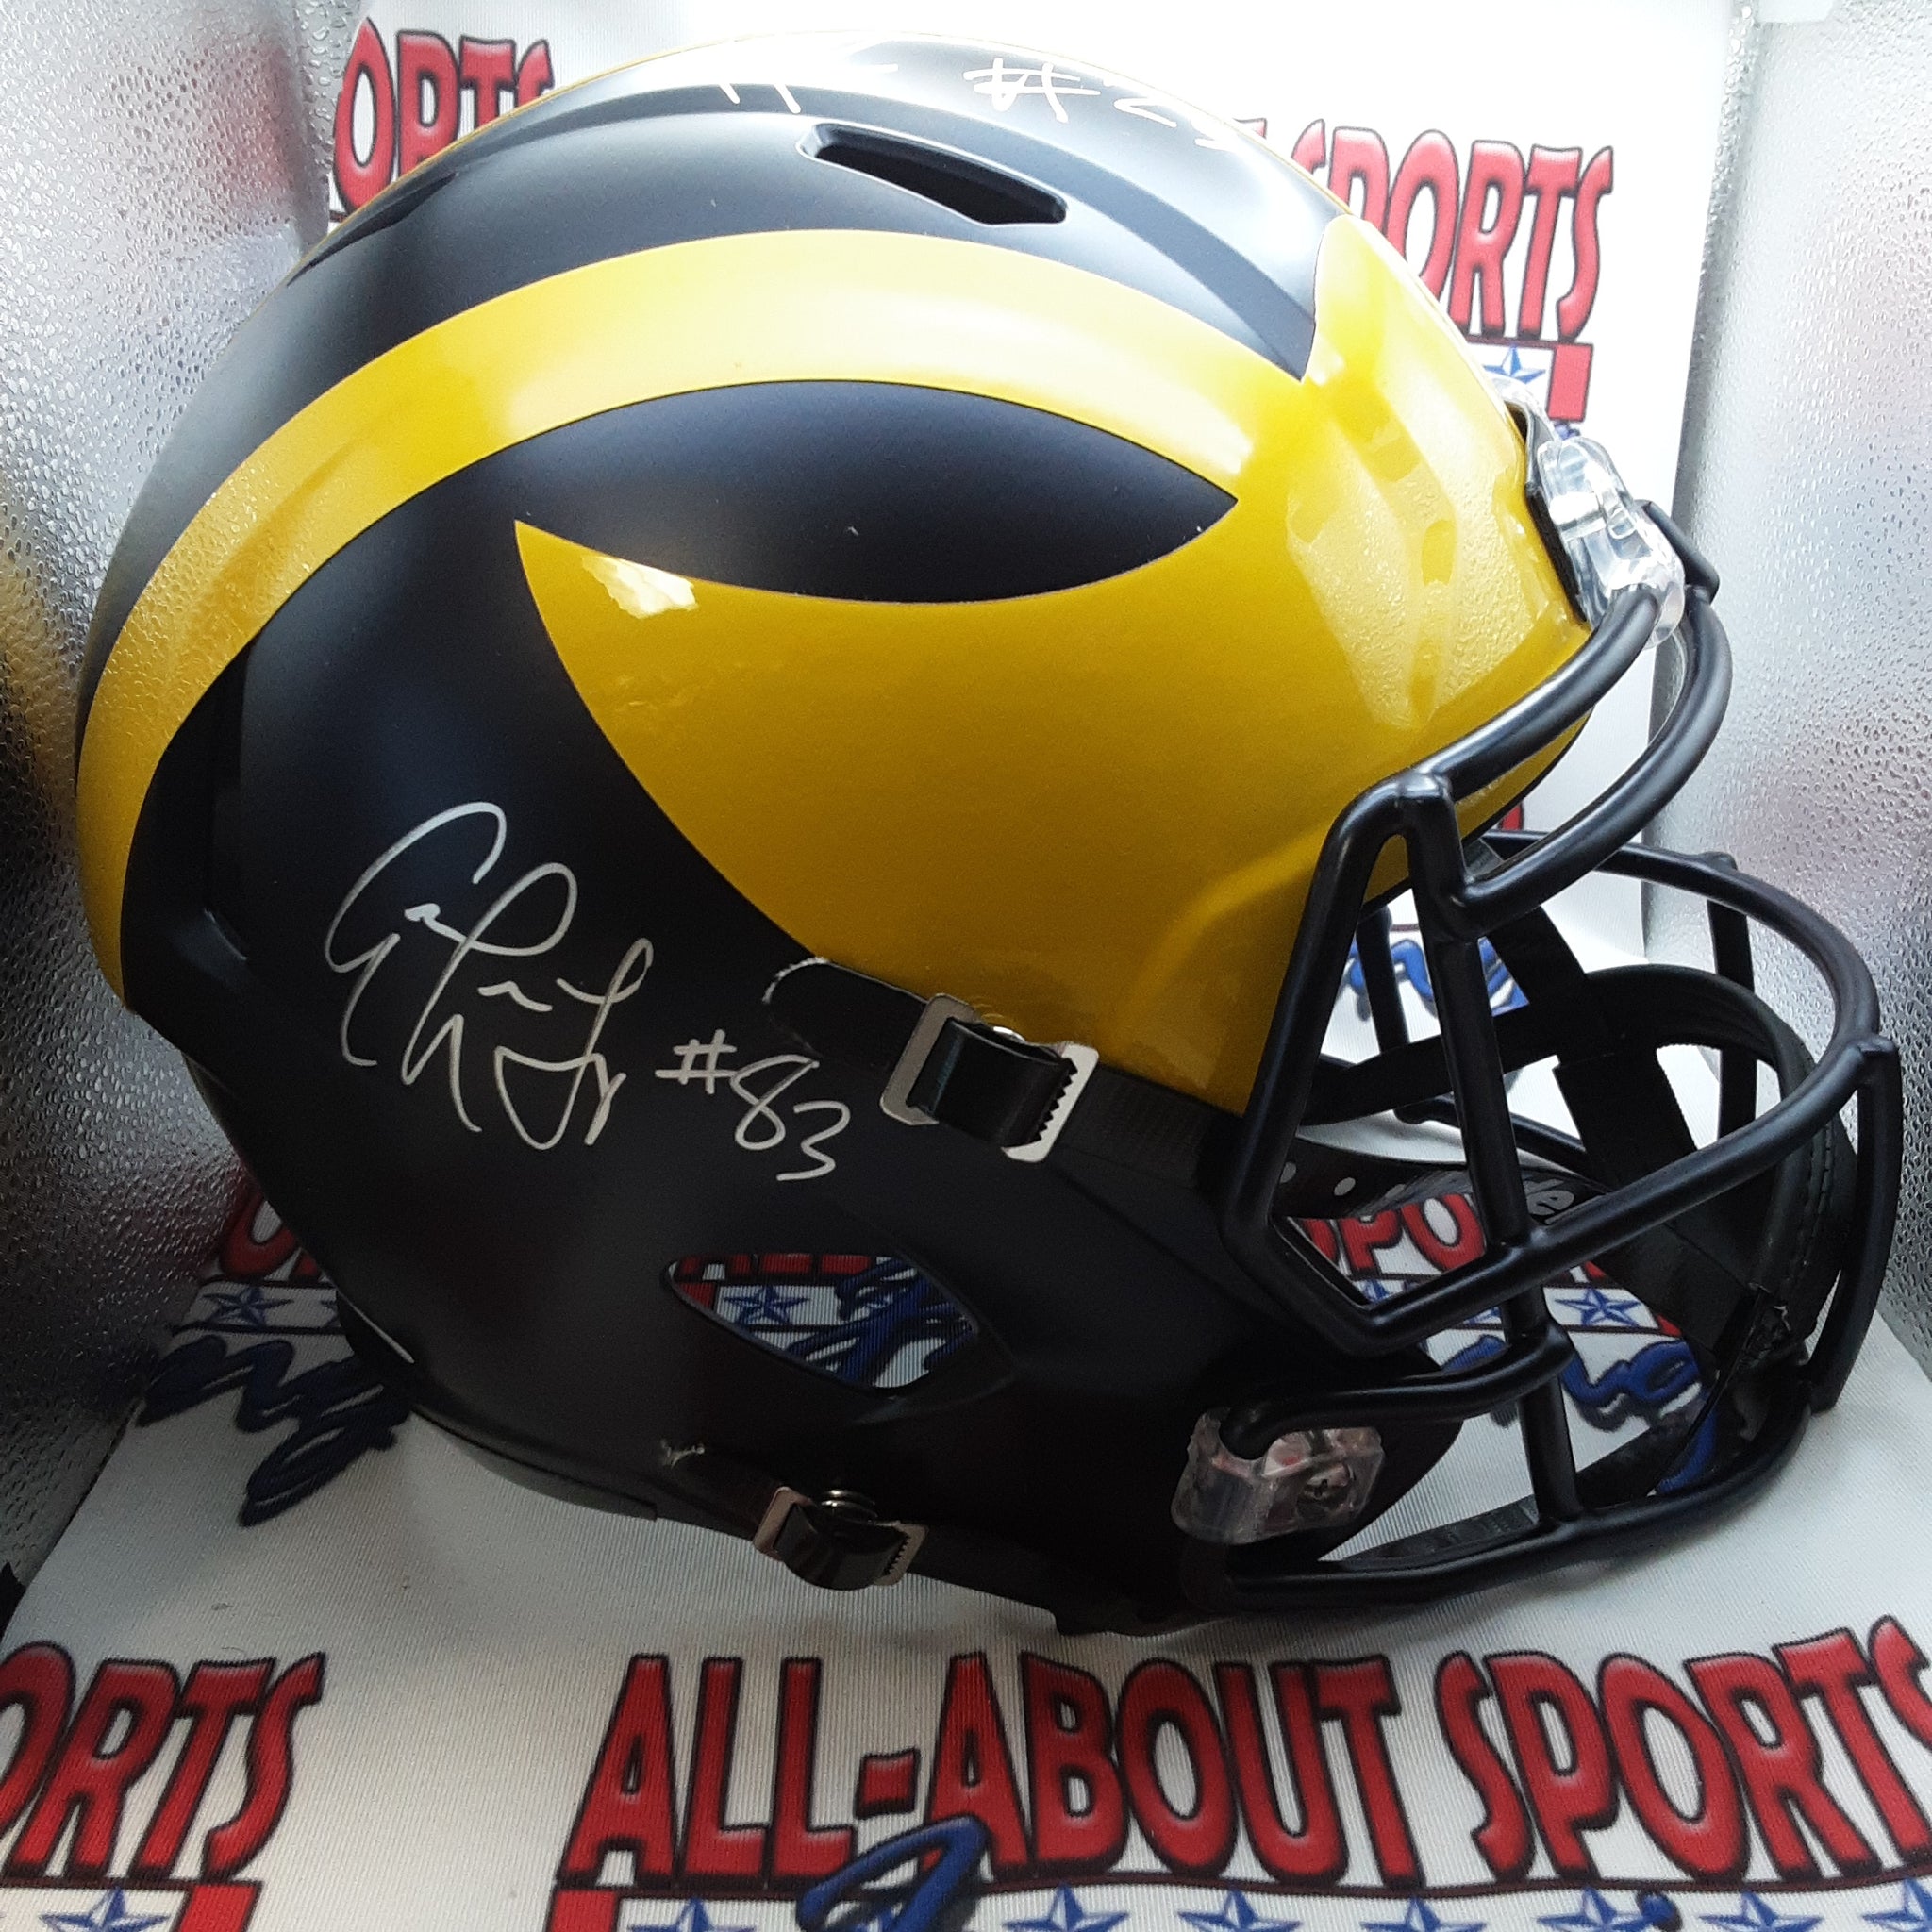 Hassan Haskins and Erick All Authentic Signed Autographed Full-size Replica Helmet JSA